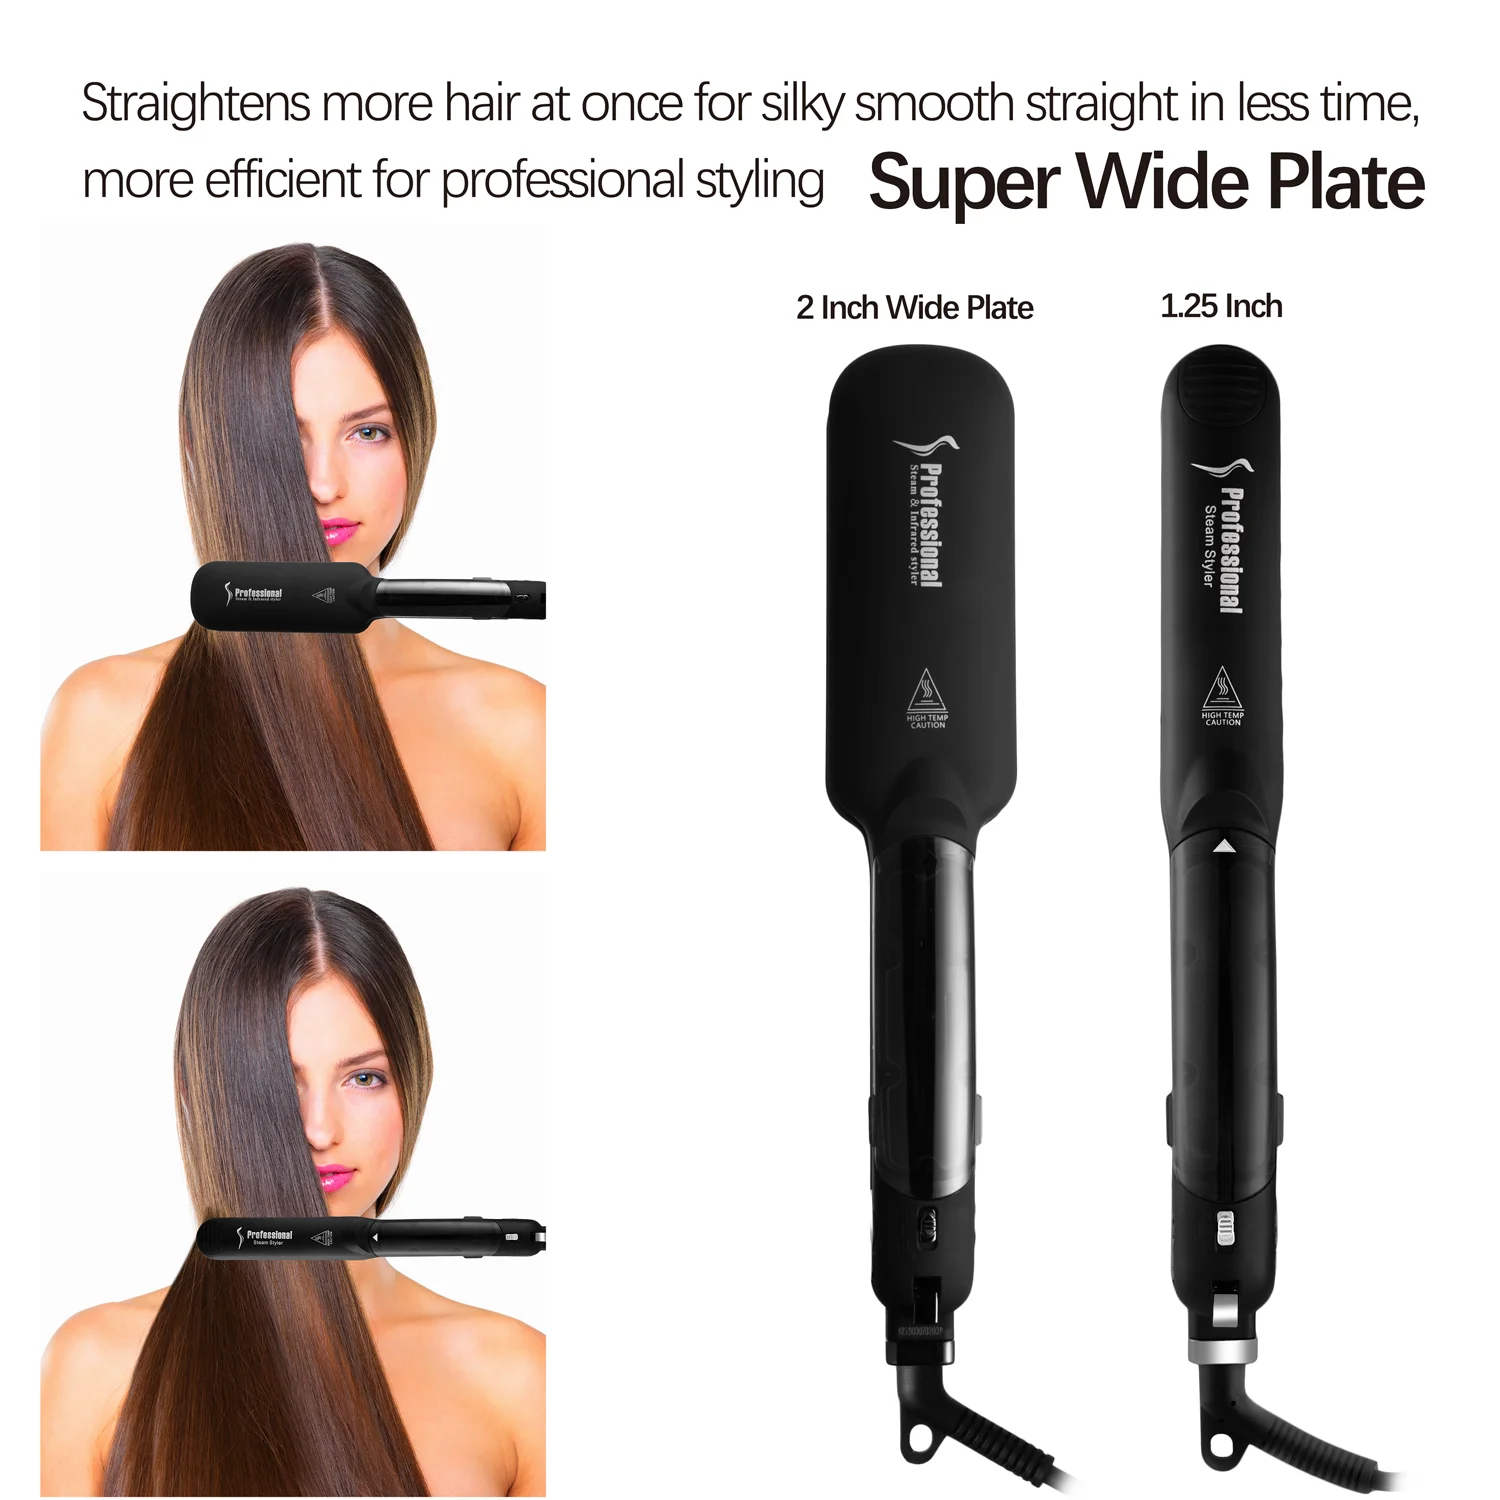 Ceramic hair straighteners with steam фото 39